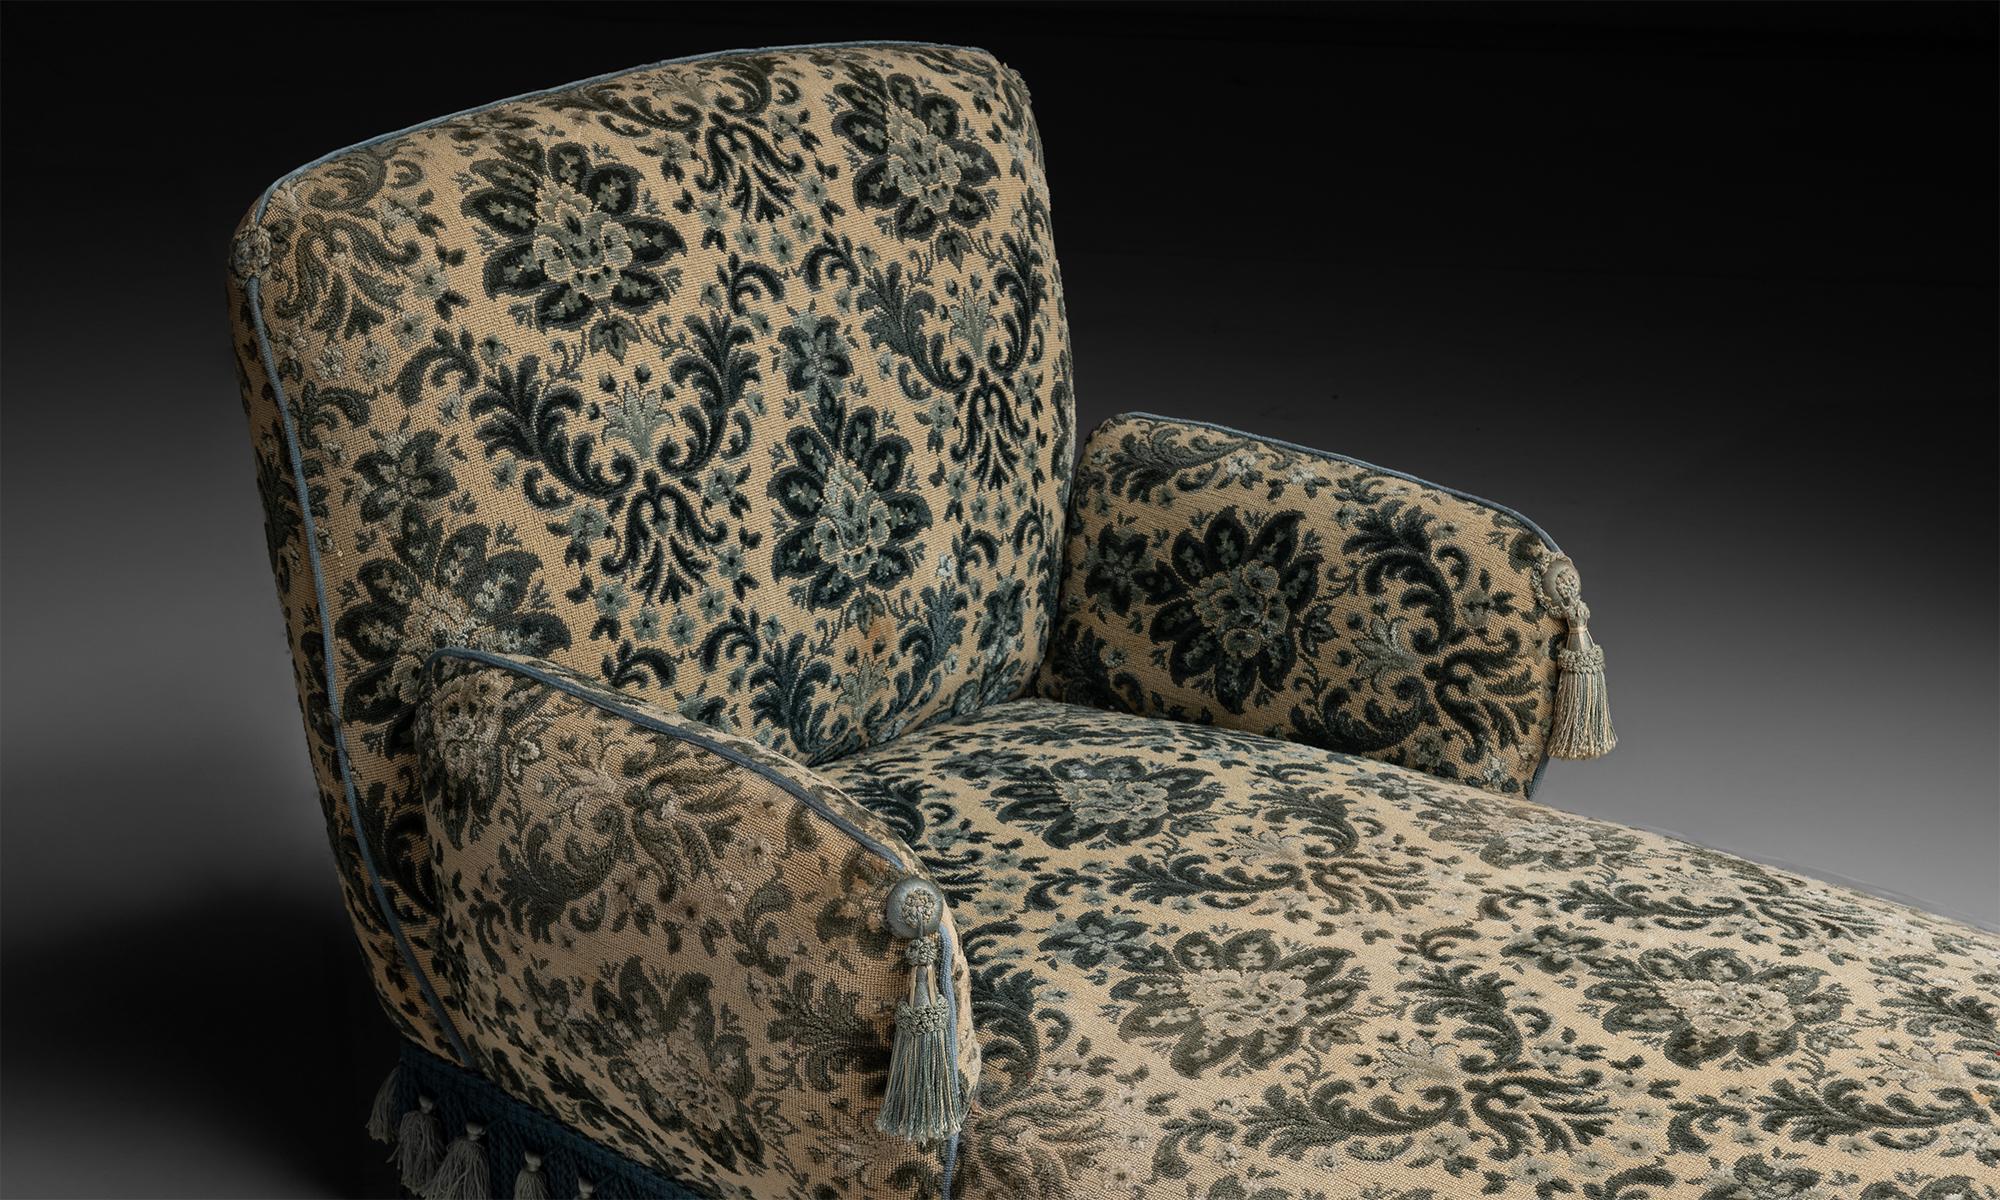 Chaise Lounge in Jacquard Fabric, France Circa 1910 In Good Condition For Sale In Culver City, CA